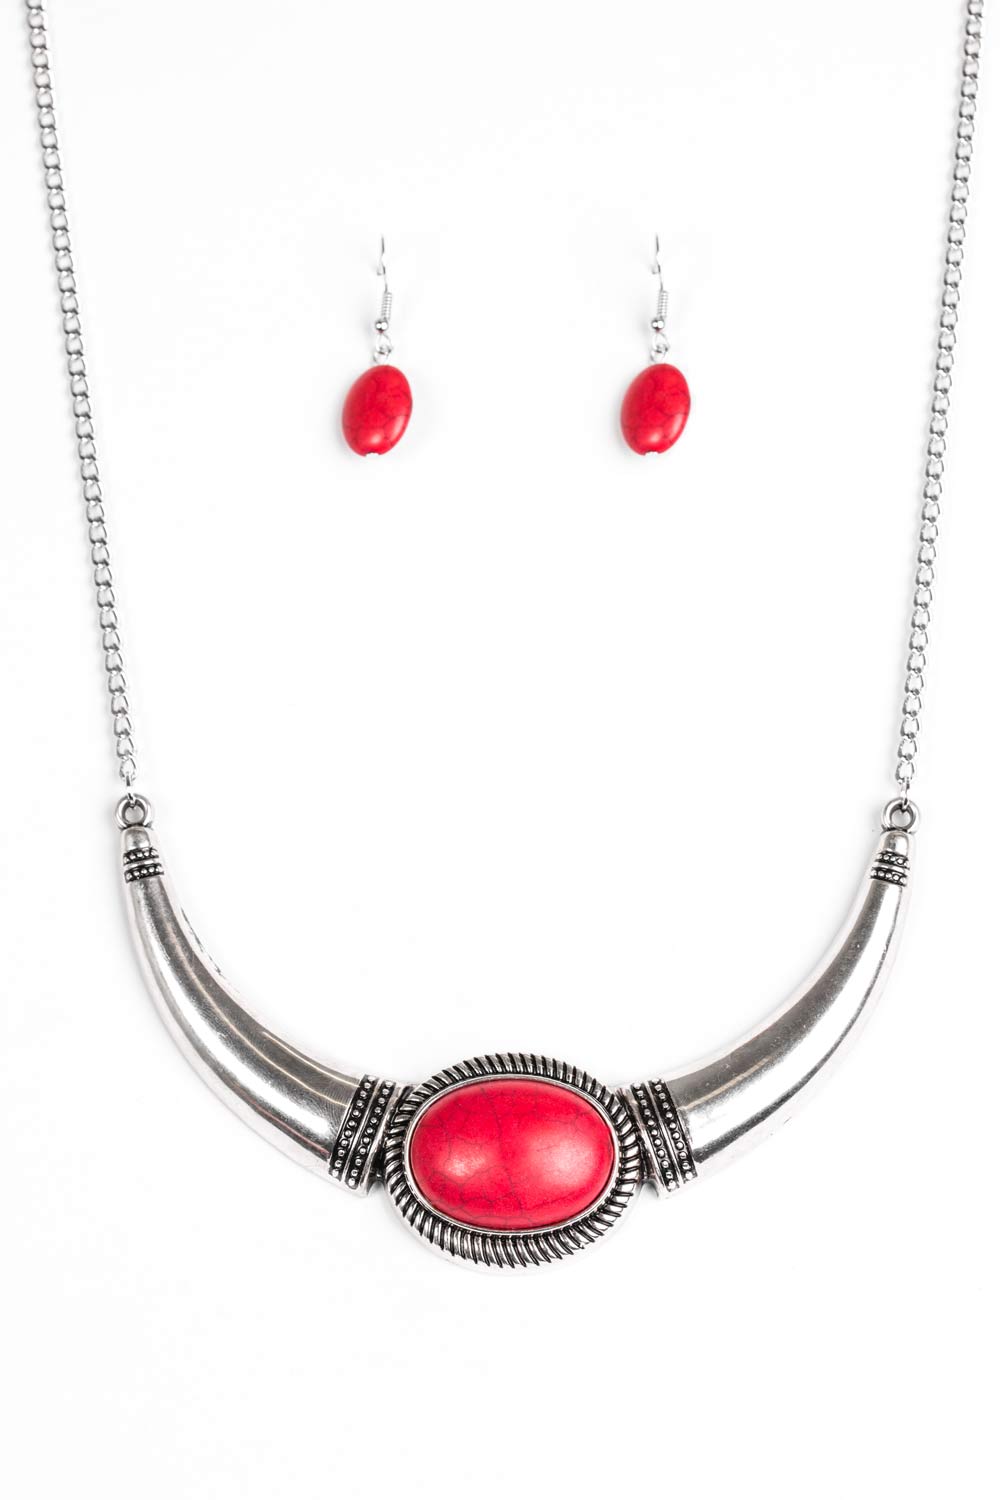 Cause A STEER - Red necklace